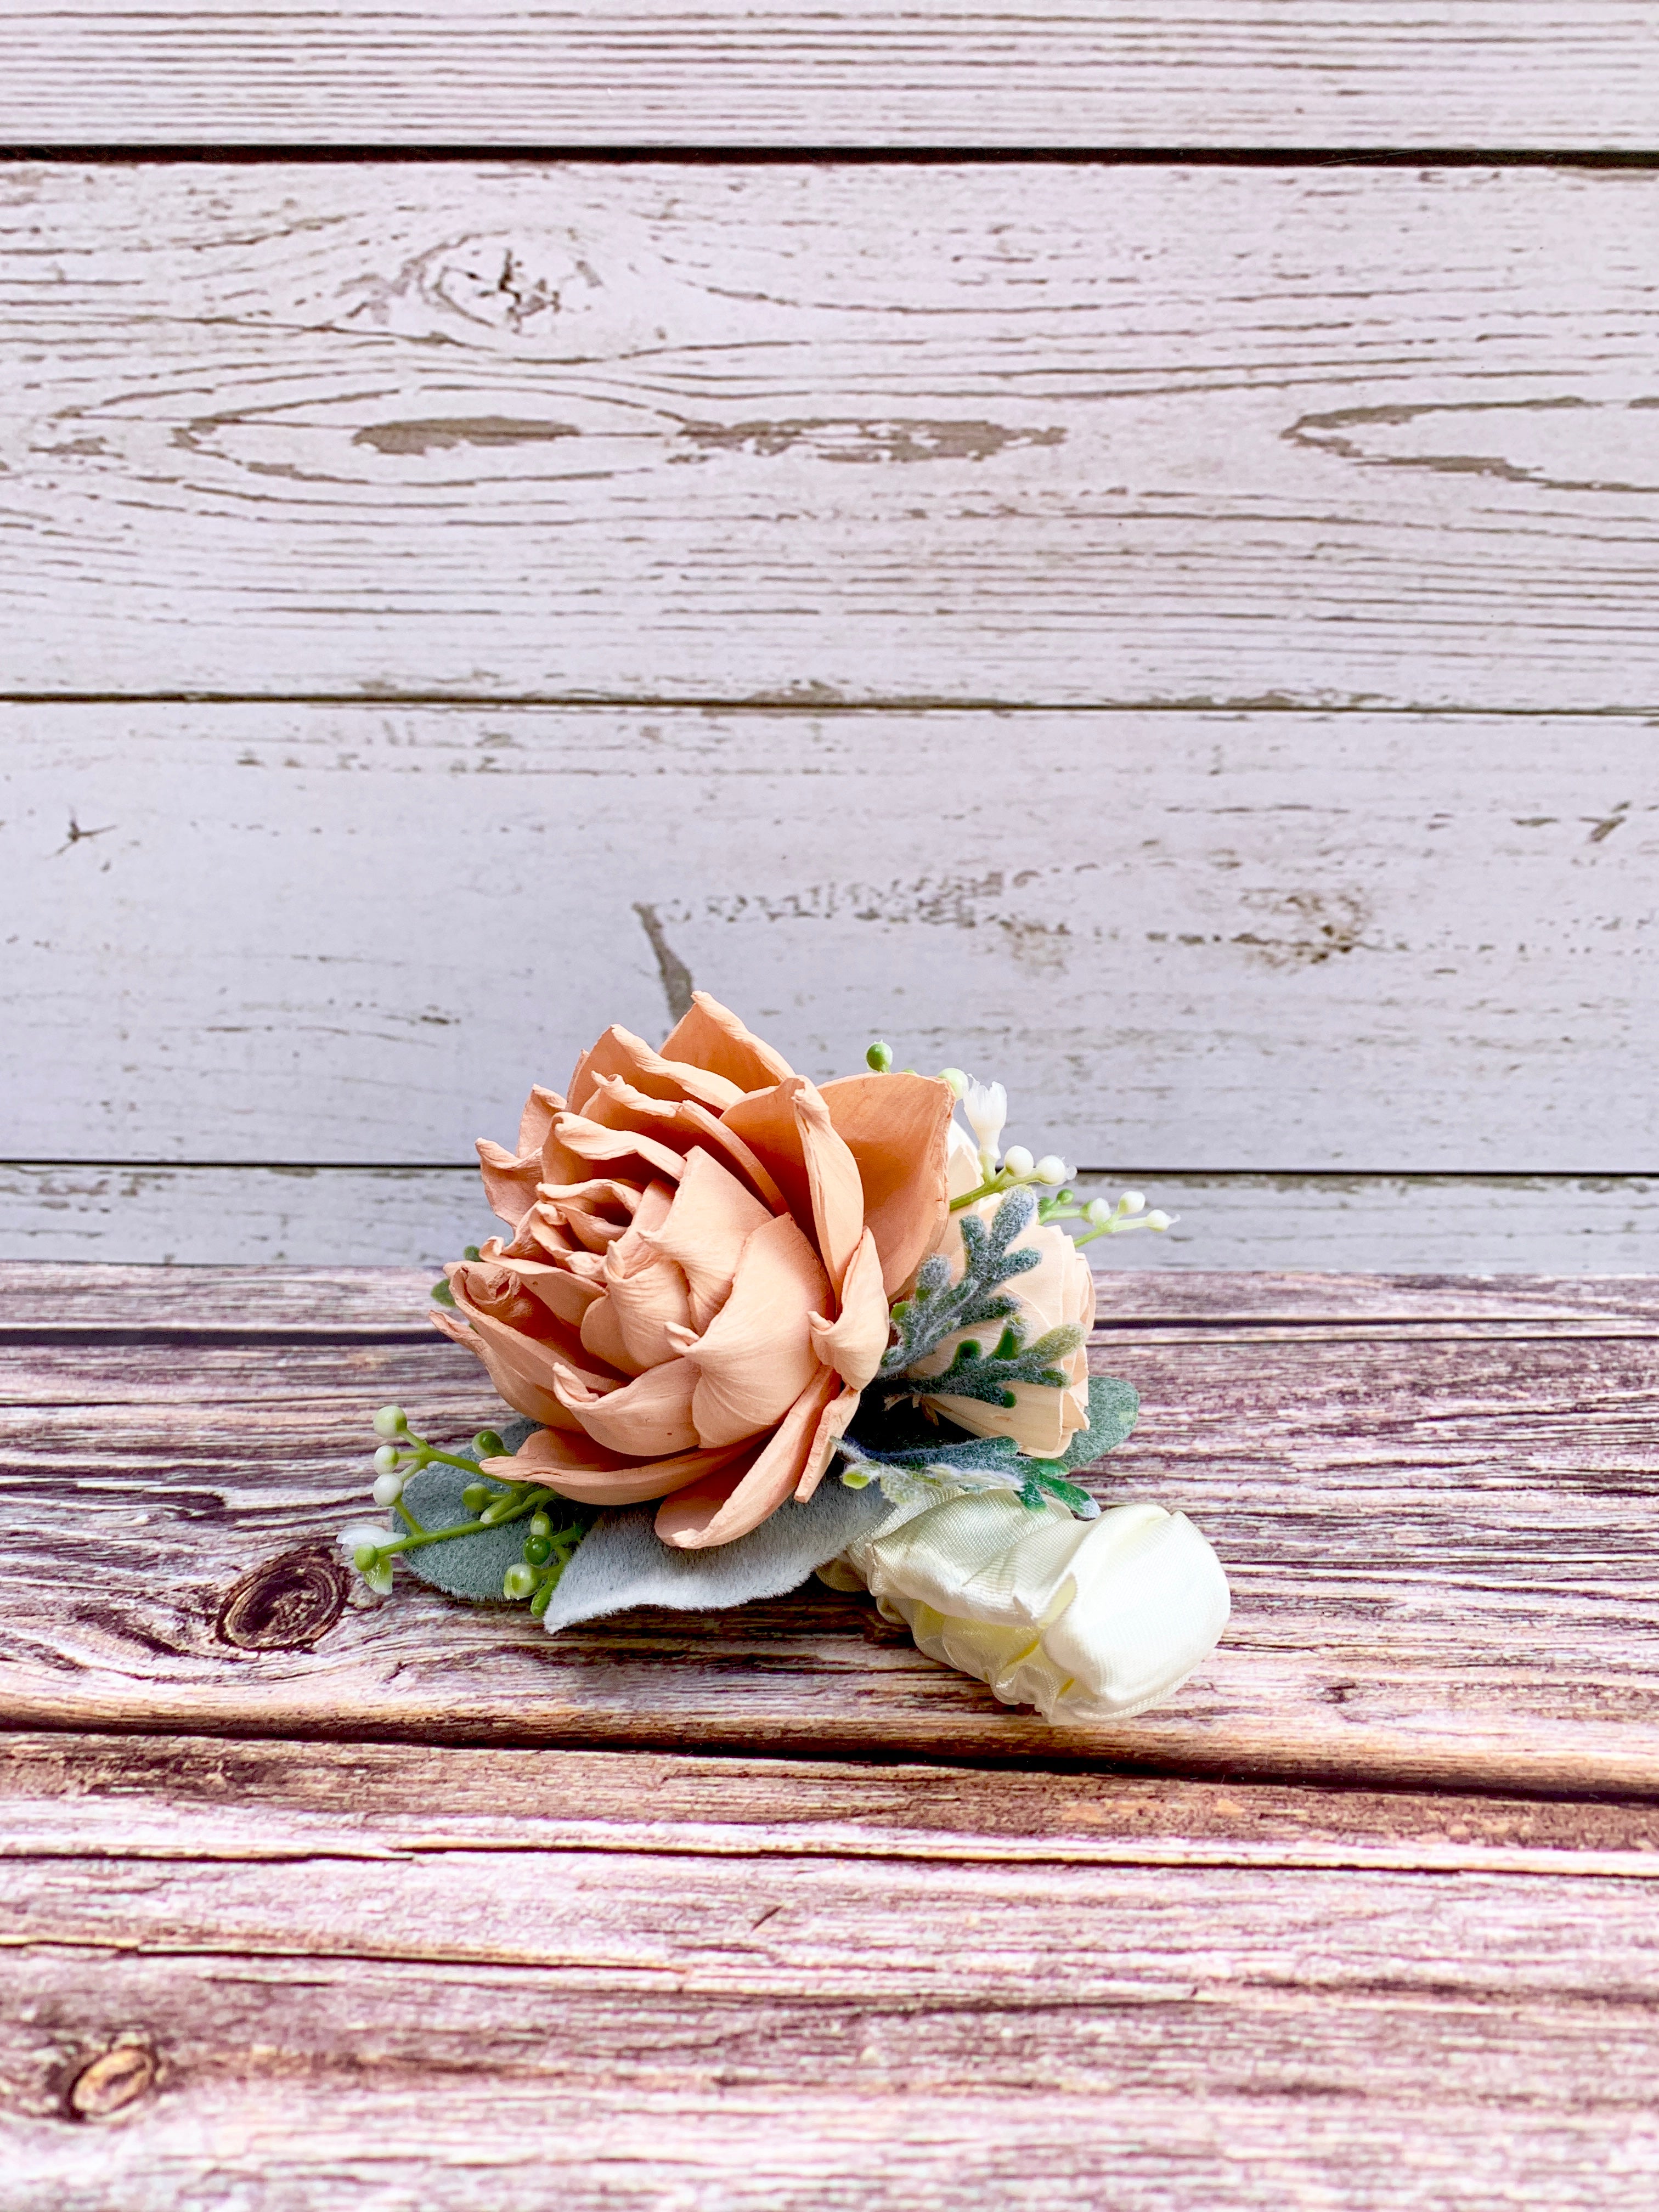 Sugar and Spice Rose Corsage